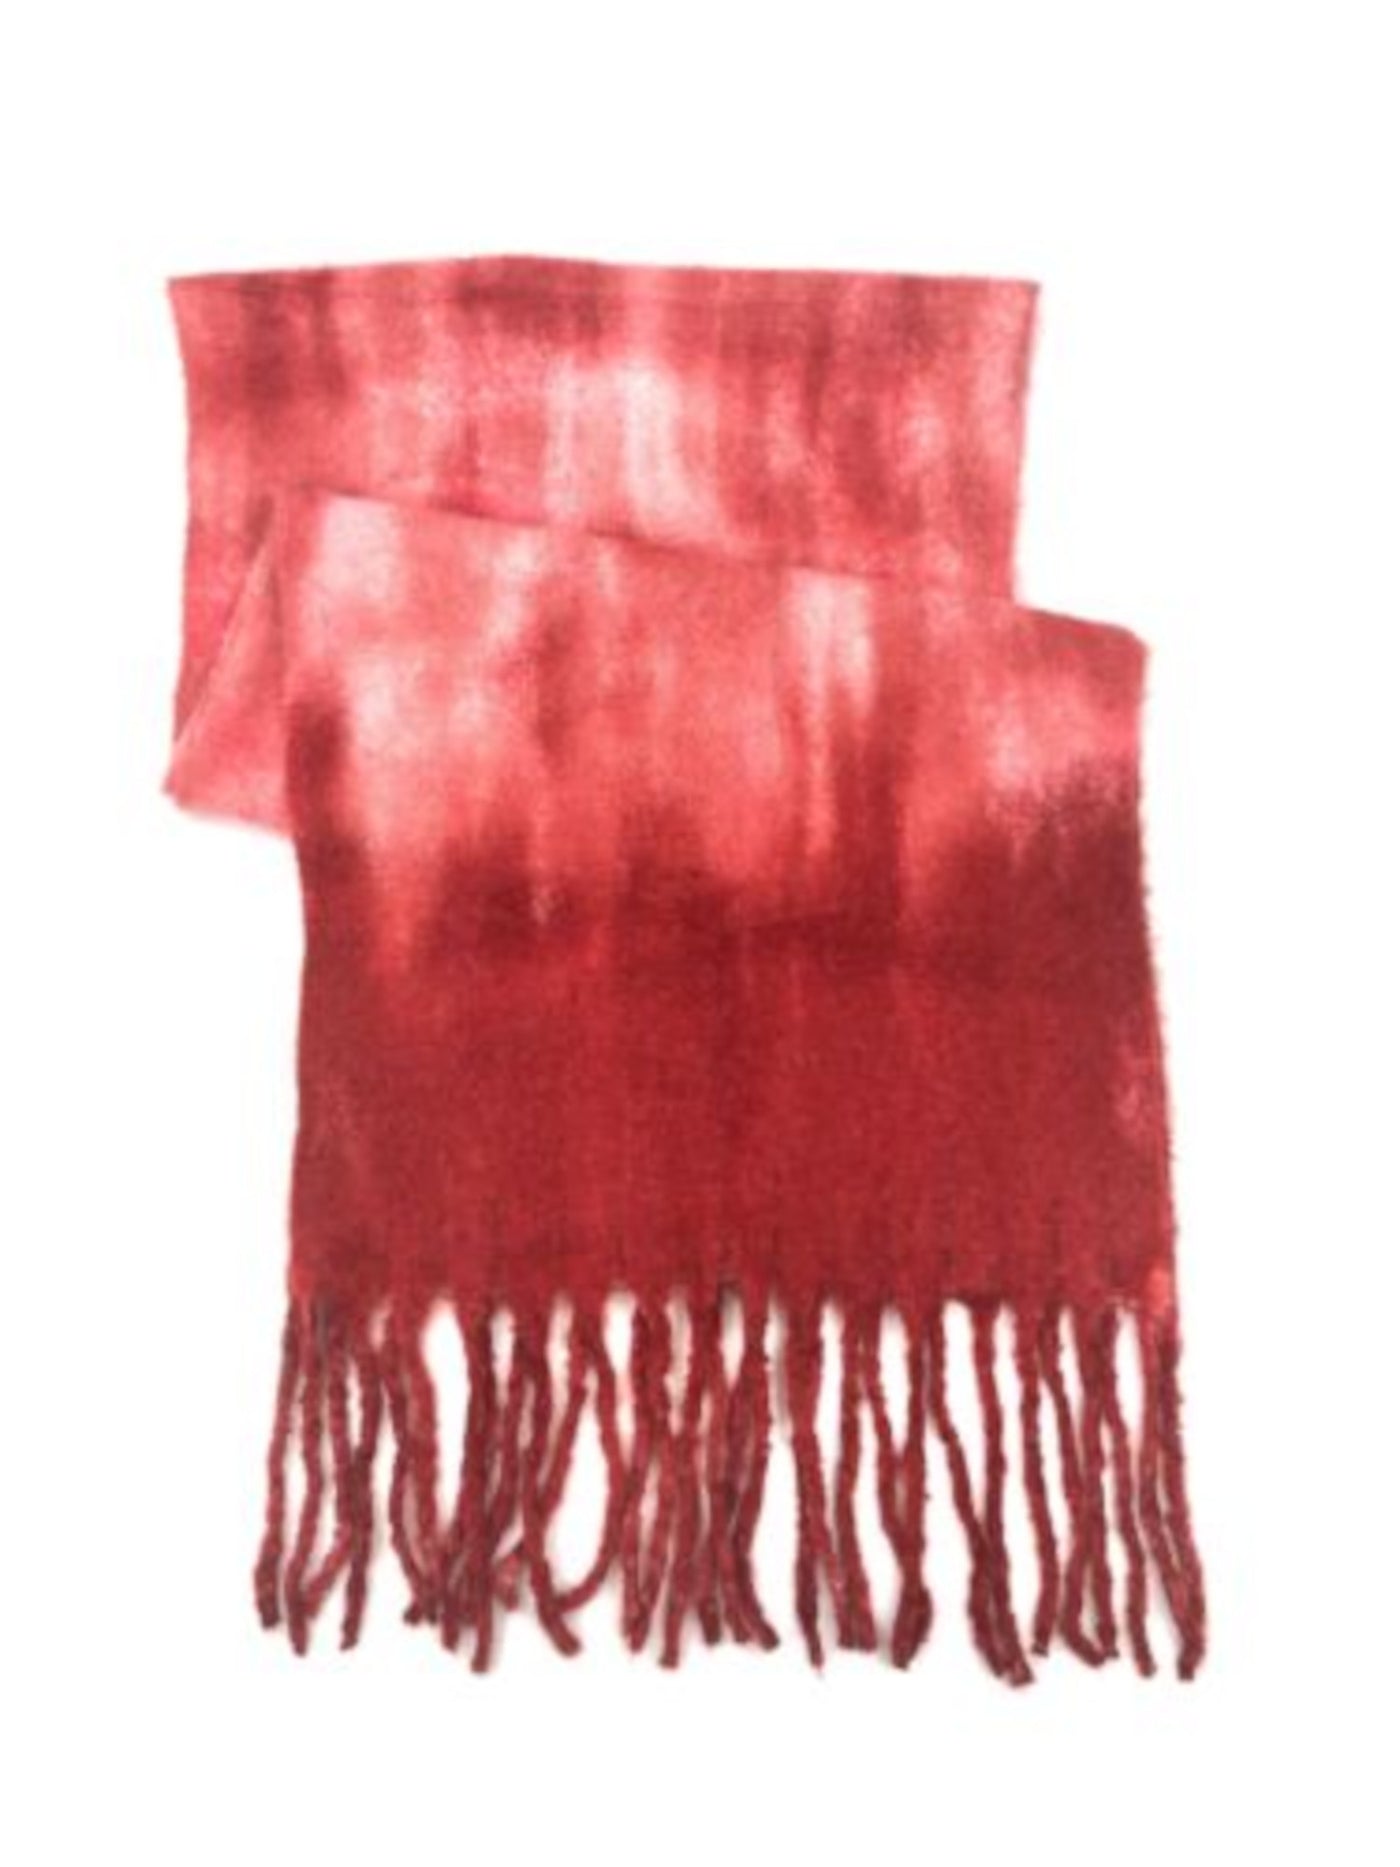 STEVE MADDEN Womens Terracotta Red Tie-Dyed Fringed Winter Scarf